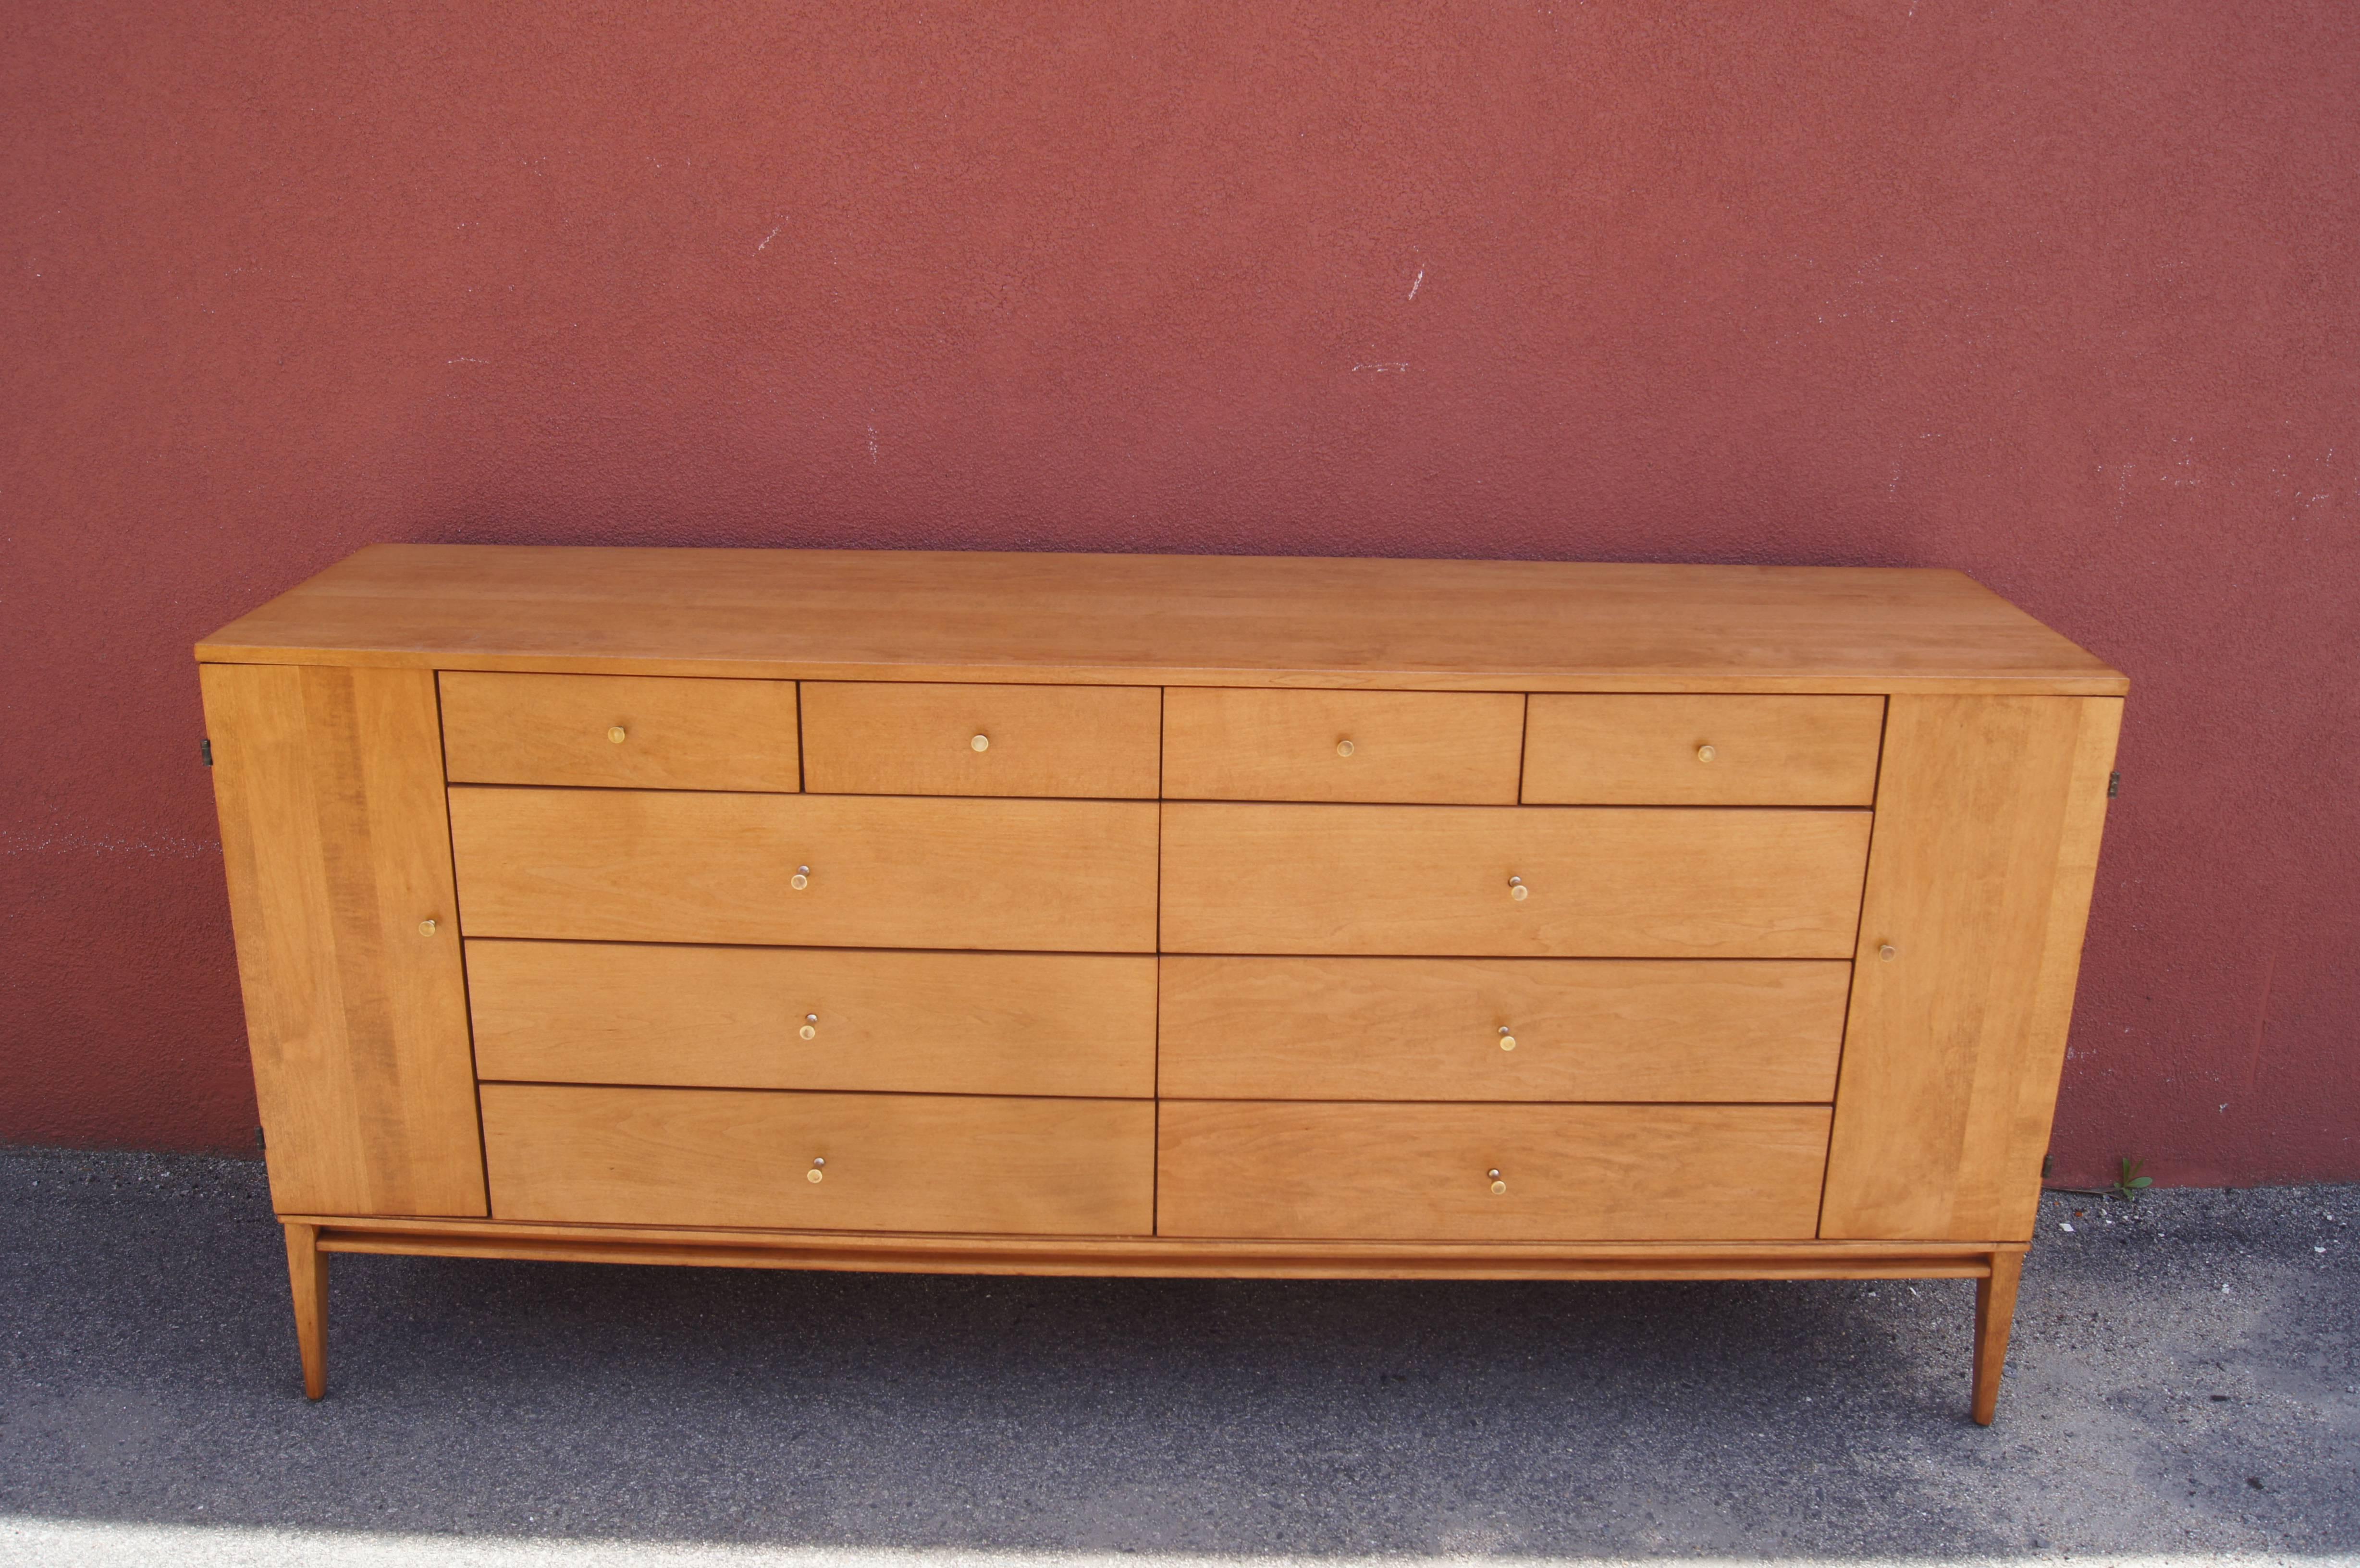 Paul McCobb designed this fabulous twenty-drawer dresser, model #1510, as part of the Planner Group by Winchendon. It features a maple case with four drawers above two banks of three wider drawers, flanked on each side by narrow cabinet doors that